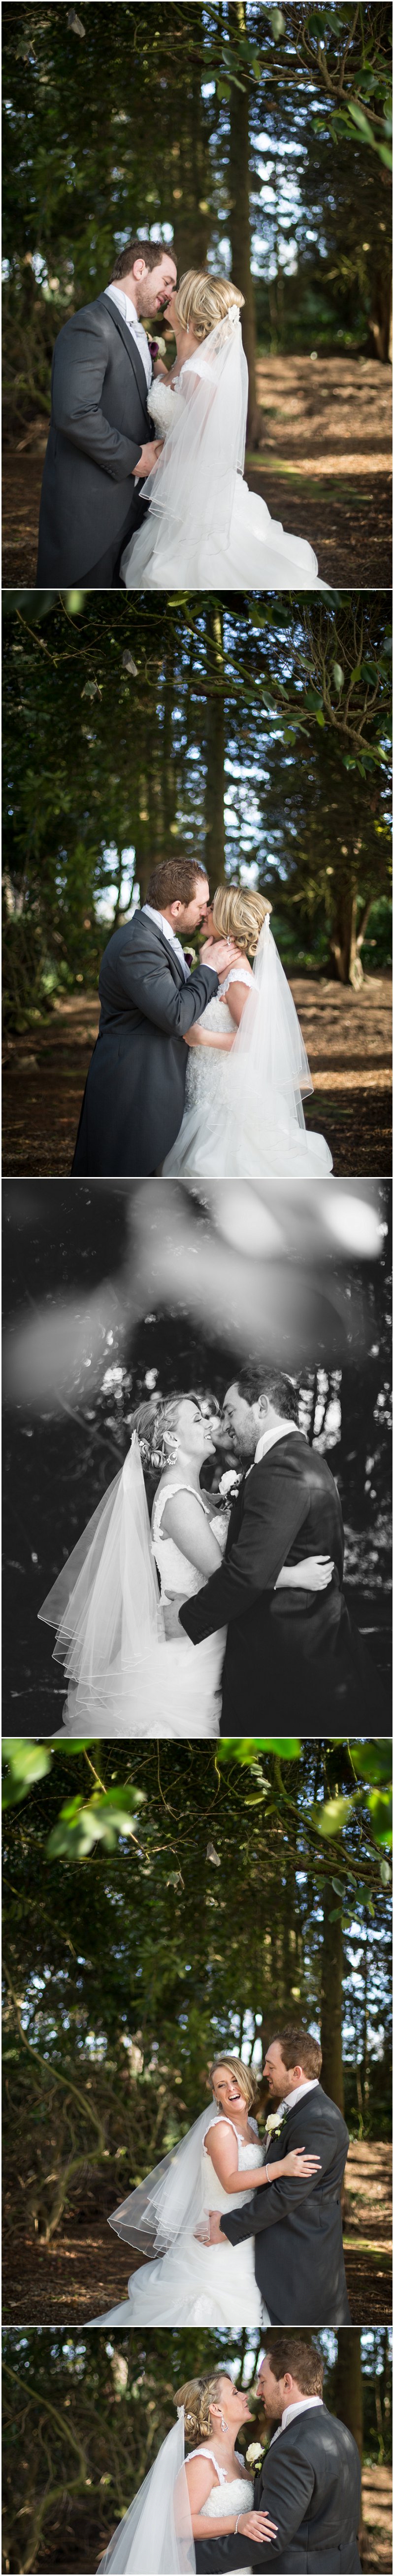 Beautiful bride and groom portraits at Knutsford Cheshire Wedding